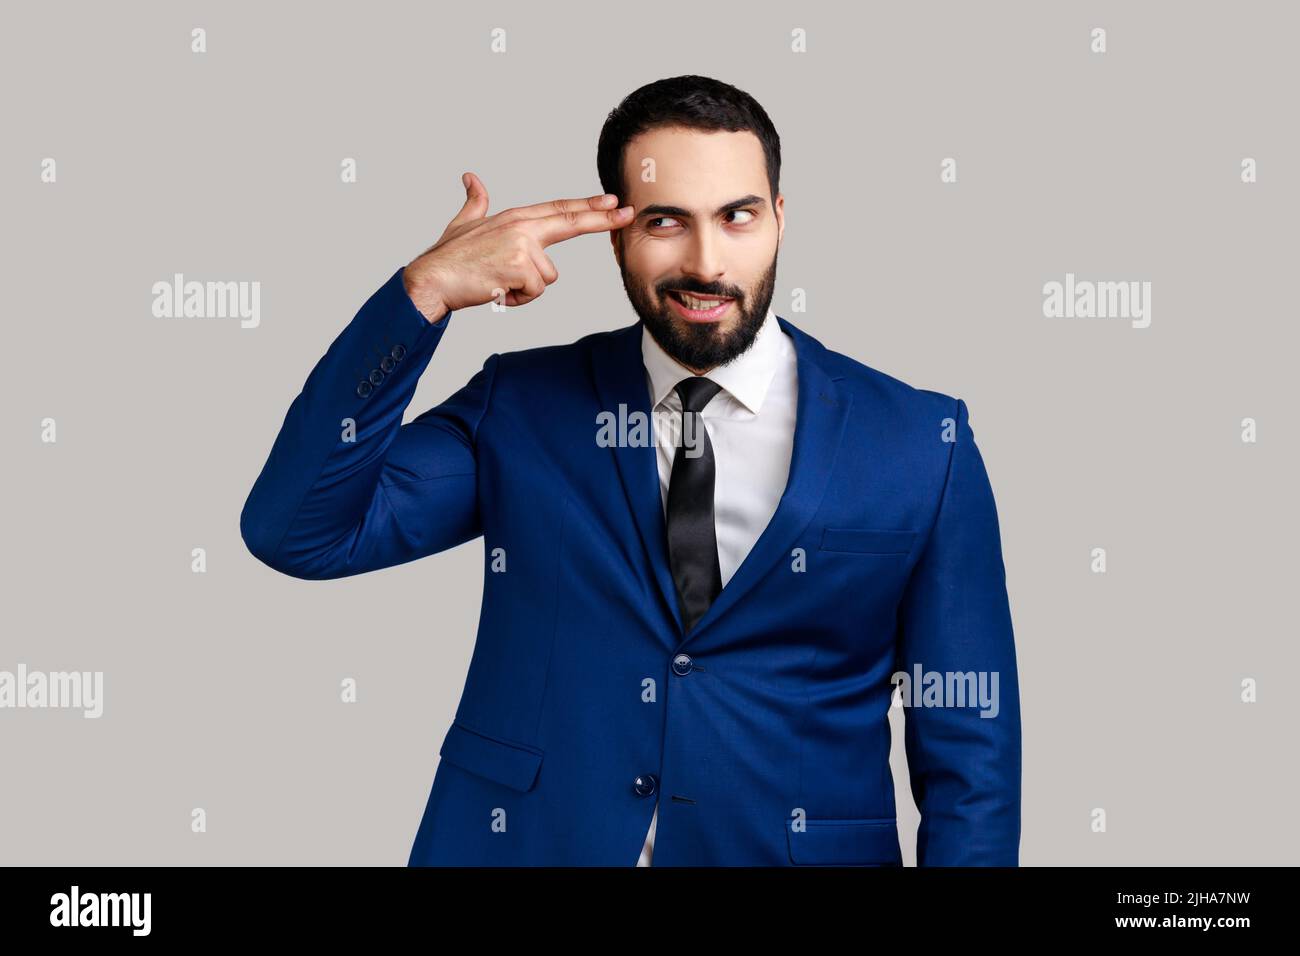 Portrait of bearded man holding fingers near head imitating gun, looking at camera with panic stressed expression, wearing official style suit. Indoor studio shot isolated on gray background. Stock Photo